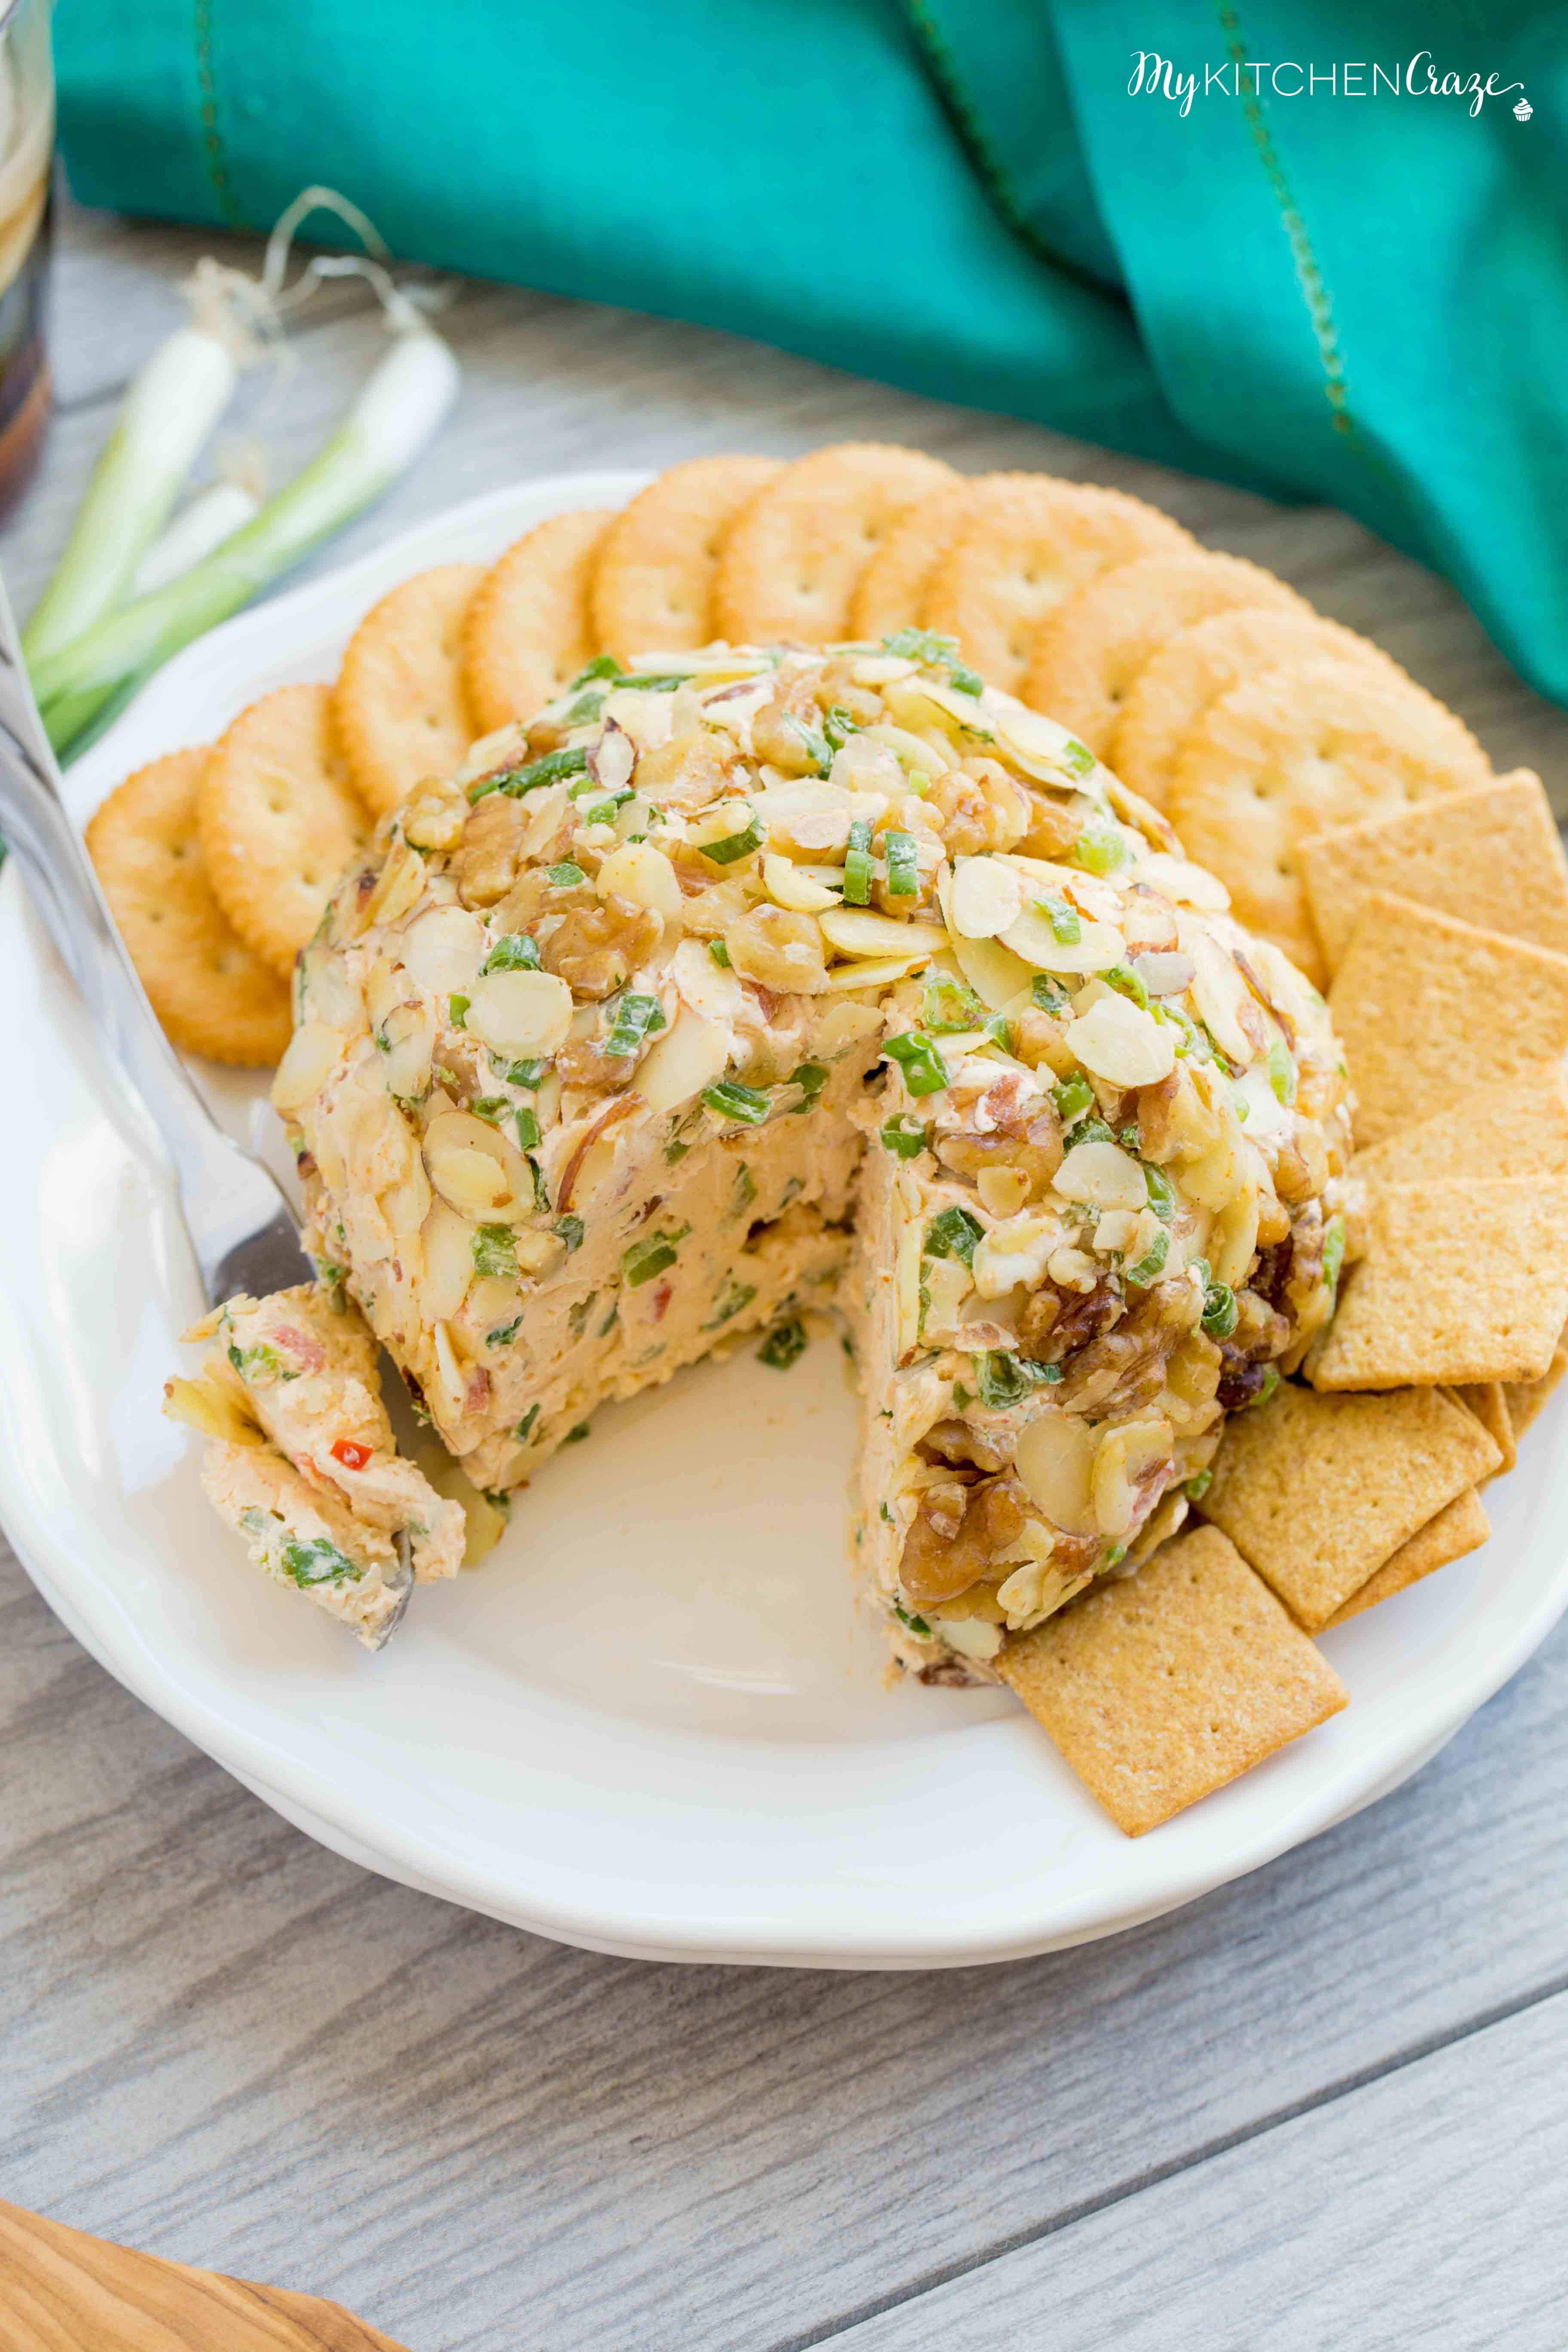 Spicy Cheese Ball ~ Loaded with cream cheese, spices, jalapeños, shredded cheeses & fresh veggies. This is one cheese ball bundled with rich creamy goodness!